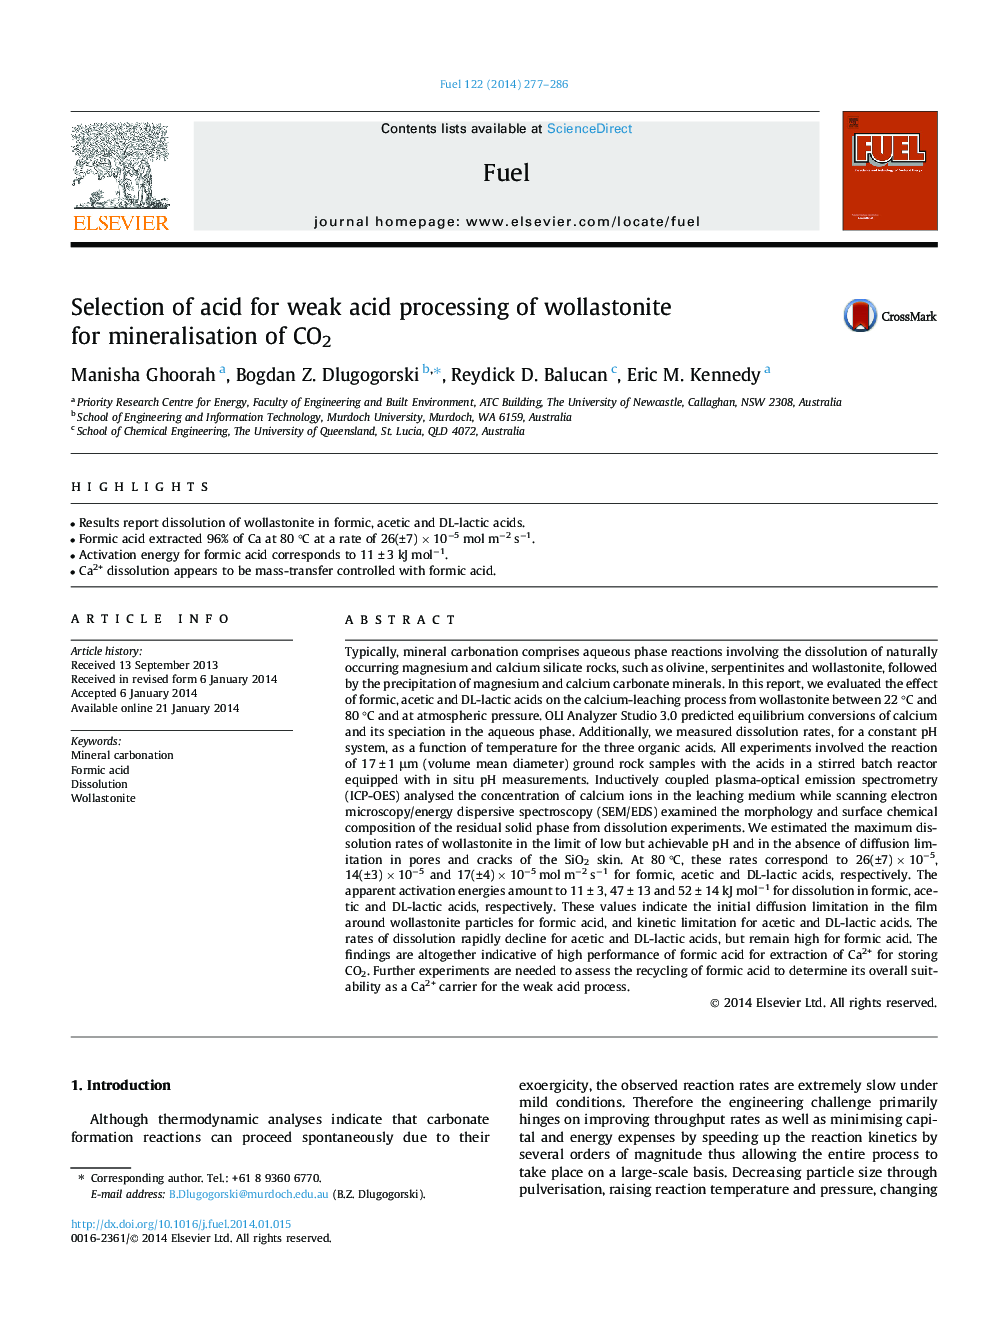 Selection of acid for weak acid processing of wollastonite for mineralisation of CO2